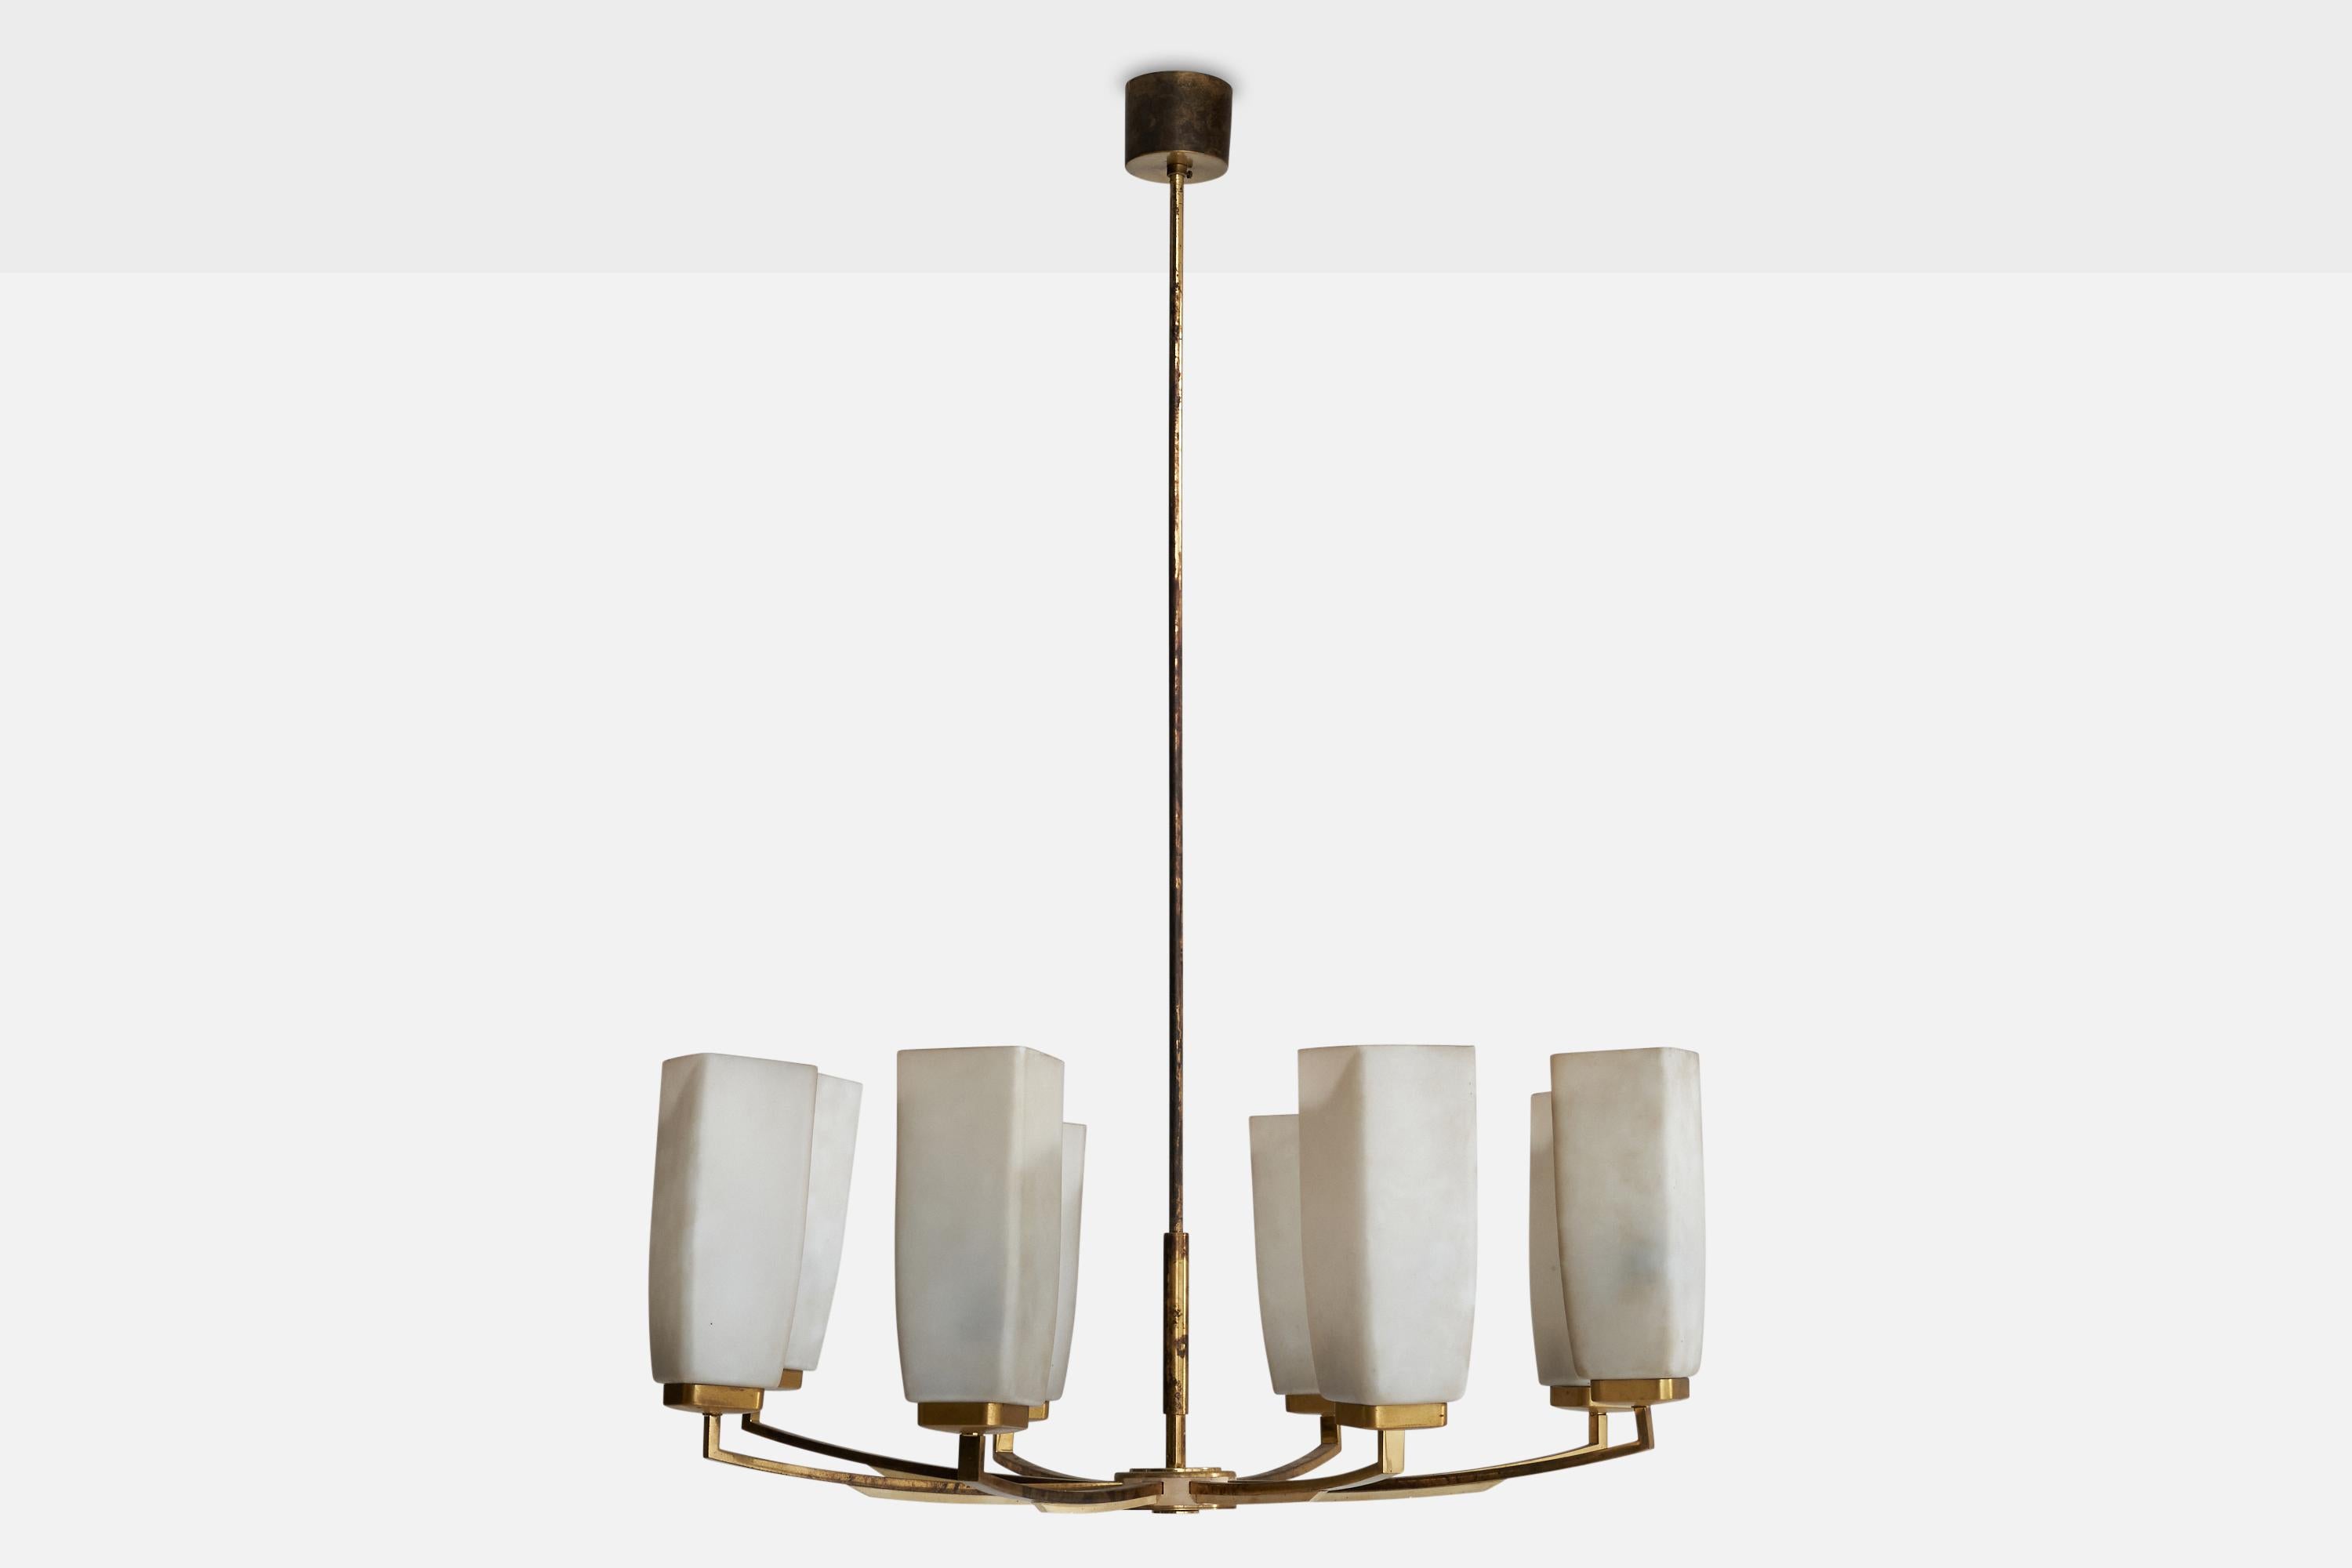 Kaiser-Leuchten, Chandelier, Brass, Glass, Germany, 1950s In Good Condition For Sale In High Point, NC